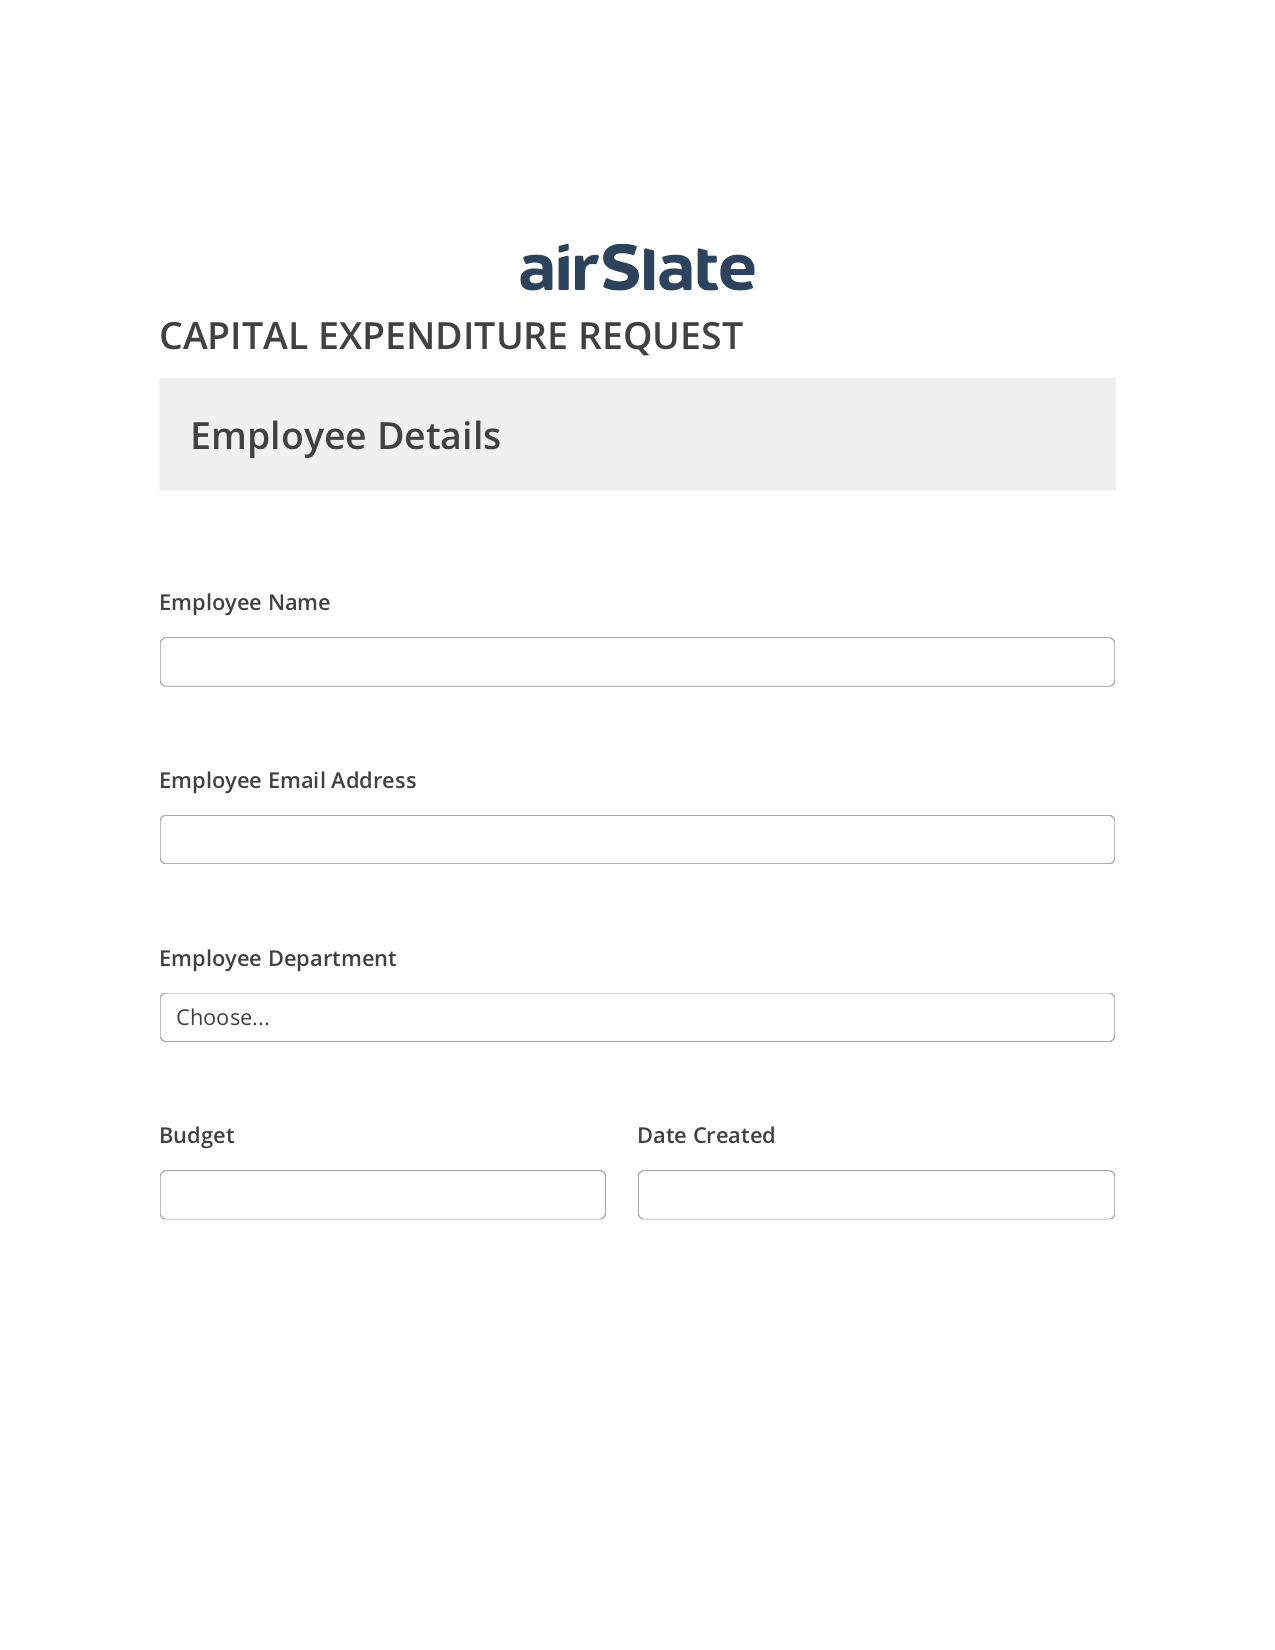 Capital Expenditure Request Approval Workflow Pre-fill from Excel Spreadsheet Bot, Send a Slate to Salesforce Contact Bot, Export to Salesforce Bot